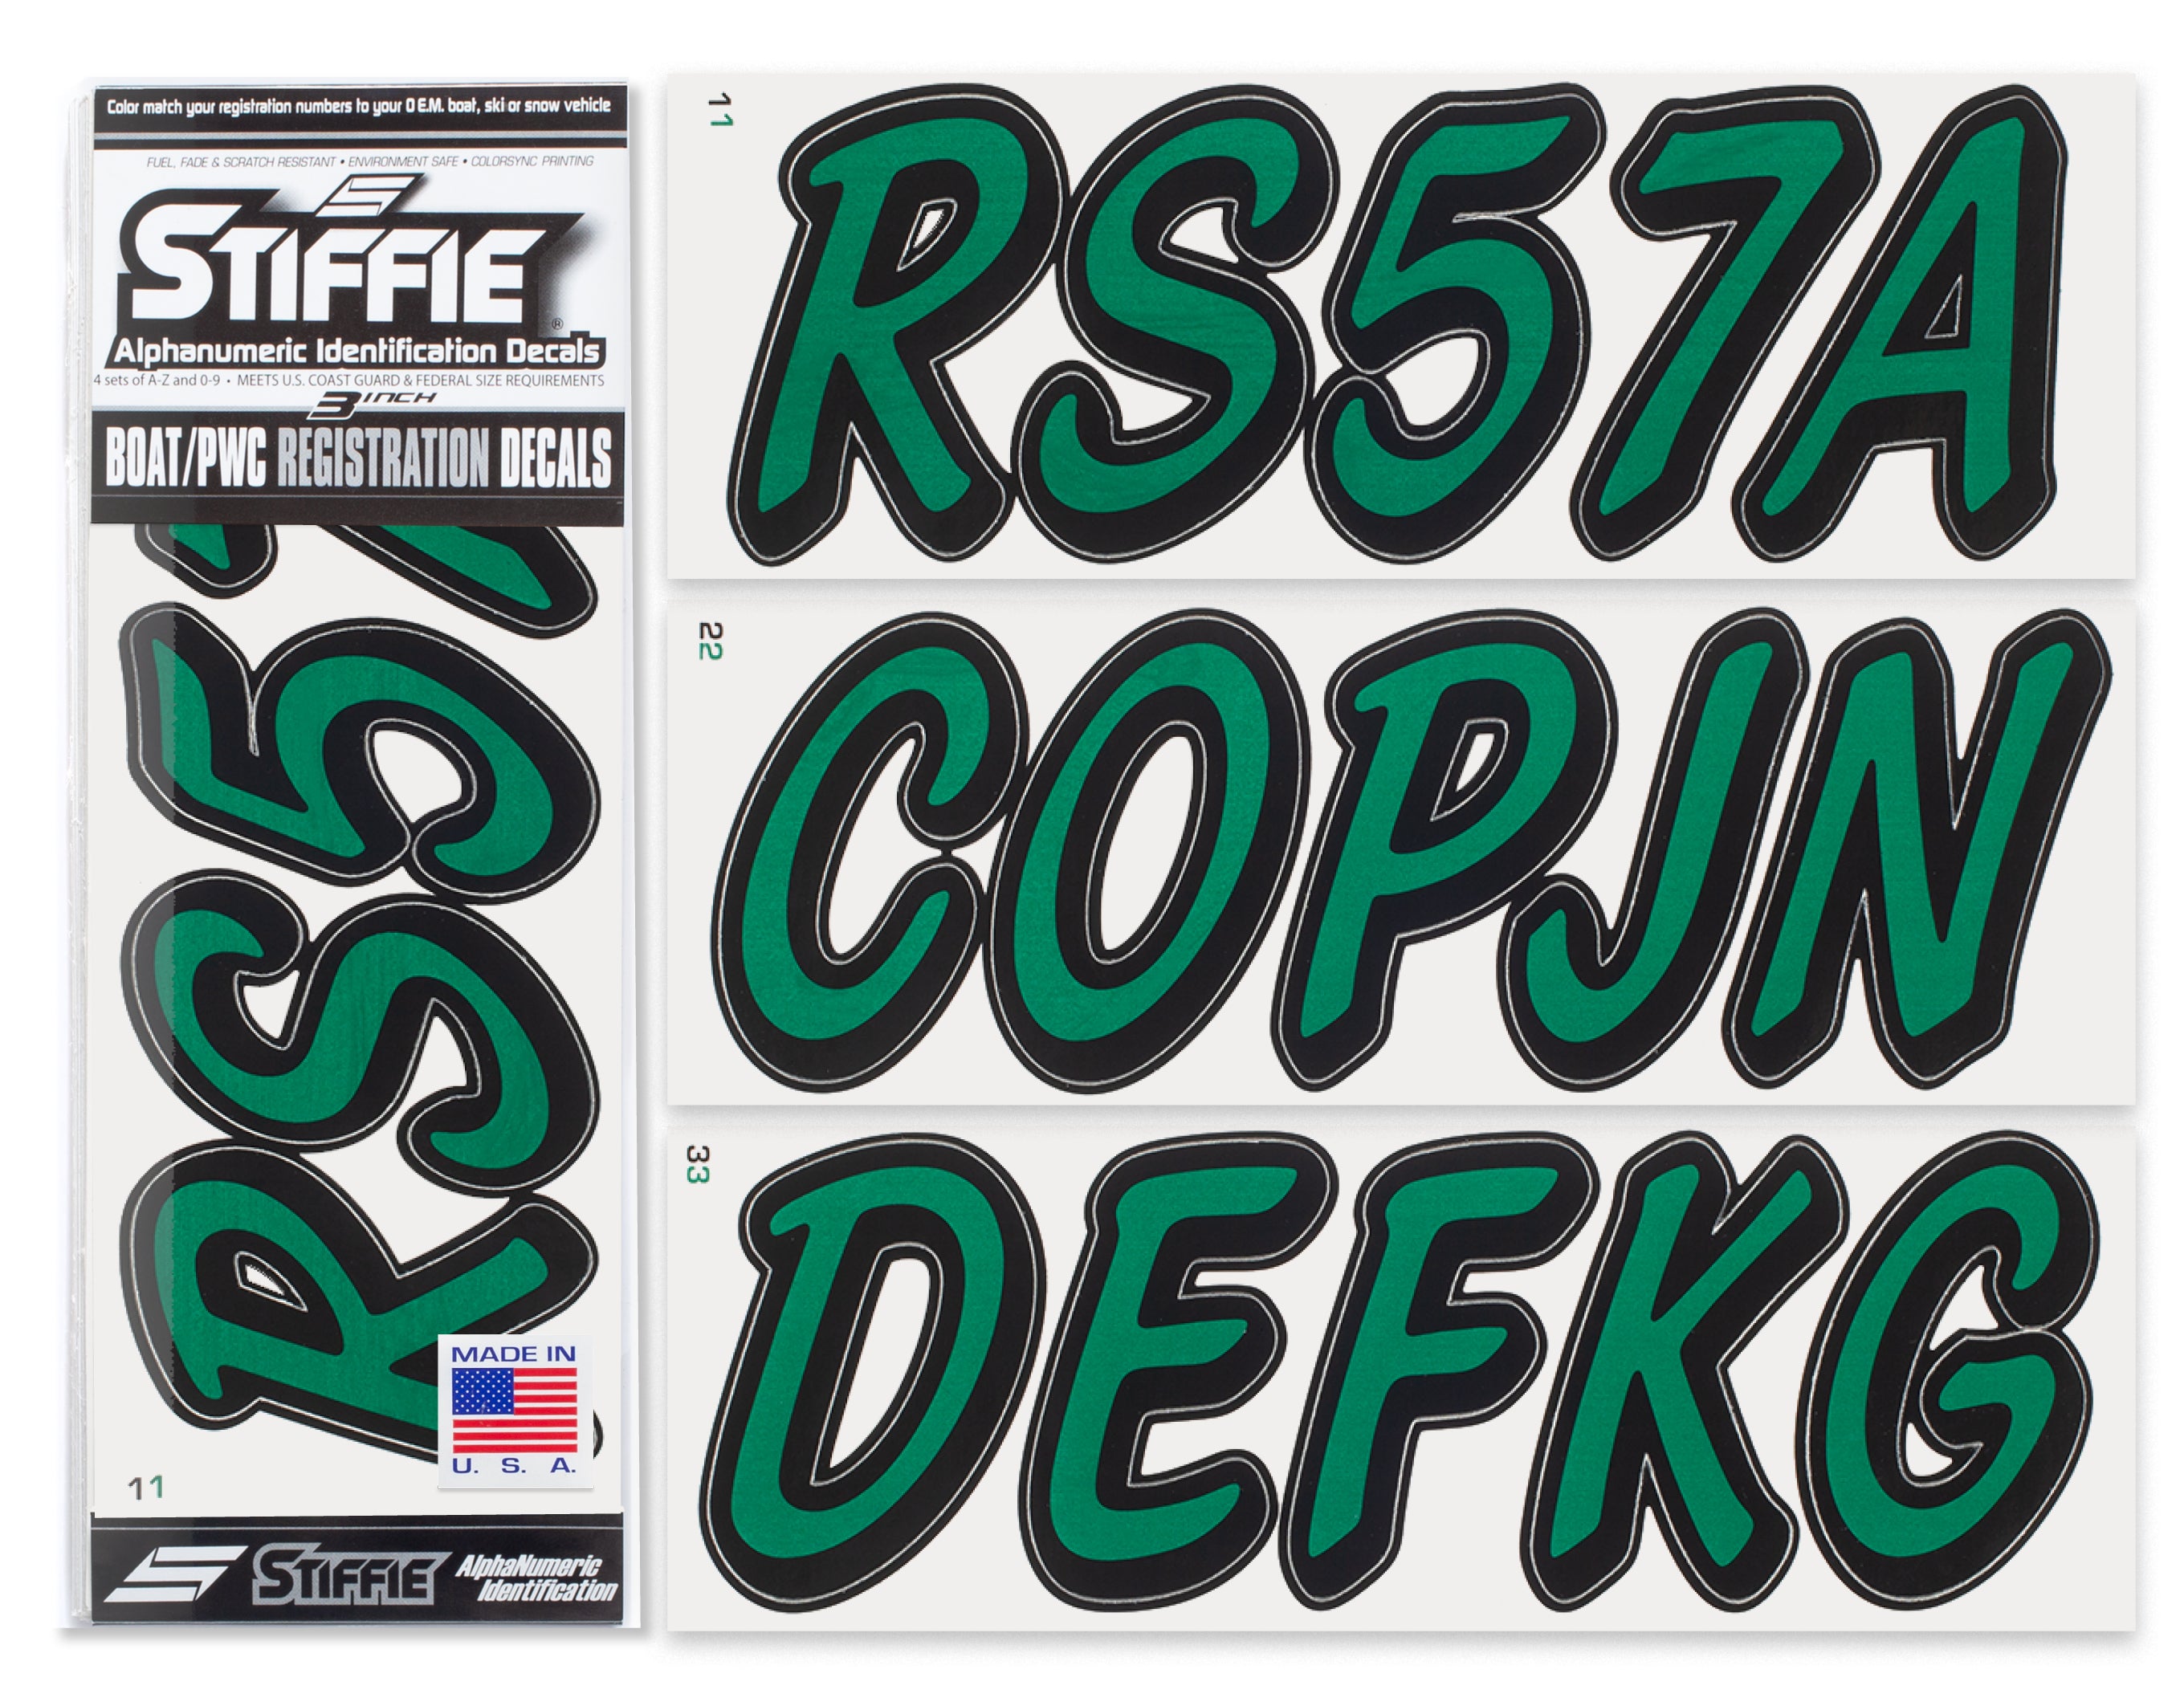 STIFFIE Whipline Solid Racing Green/Black 3" Alpha-Numeric Registration Identification Numbers Stickers Decals for Boats & Personal Watercraft